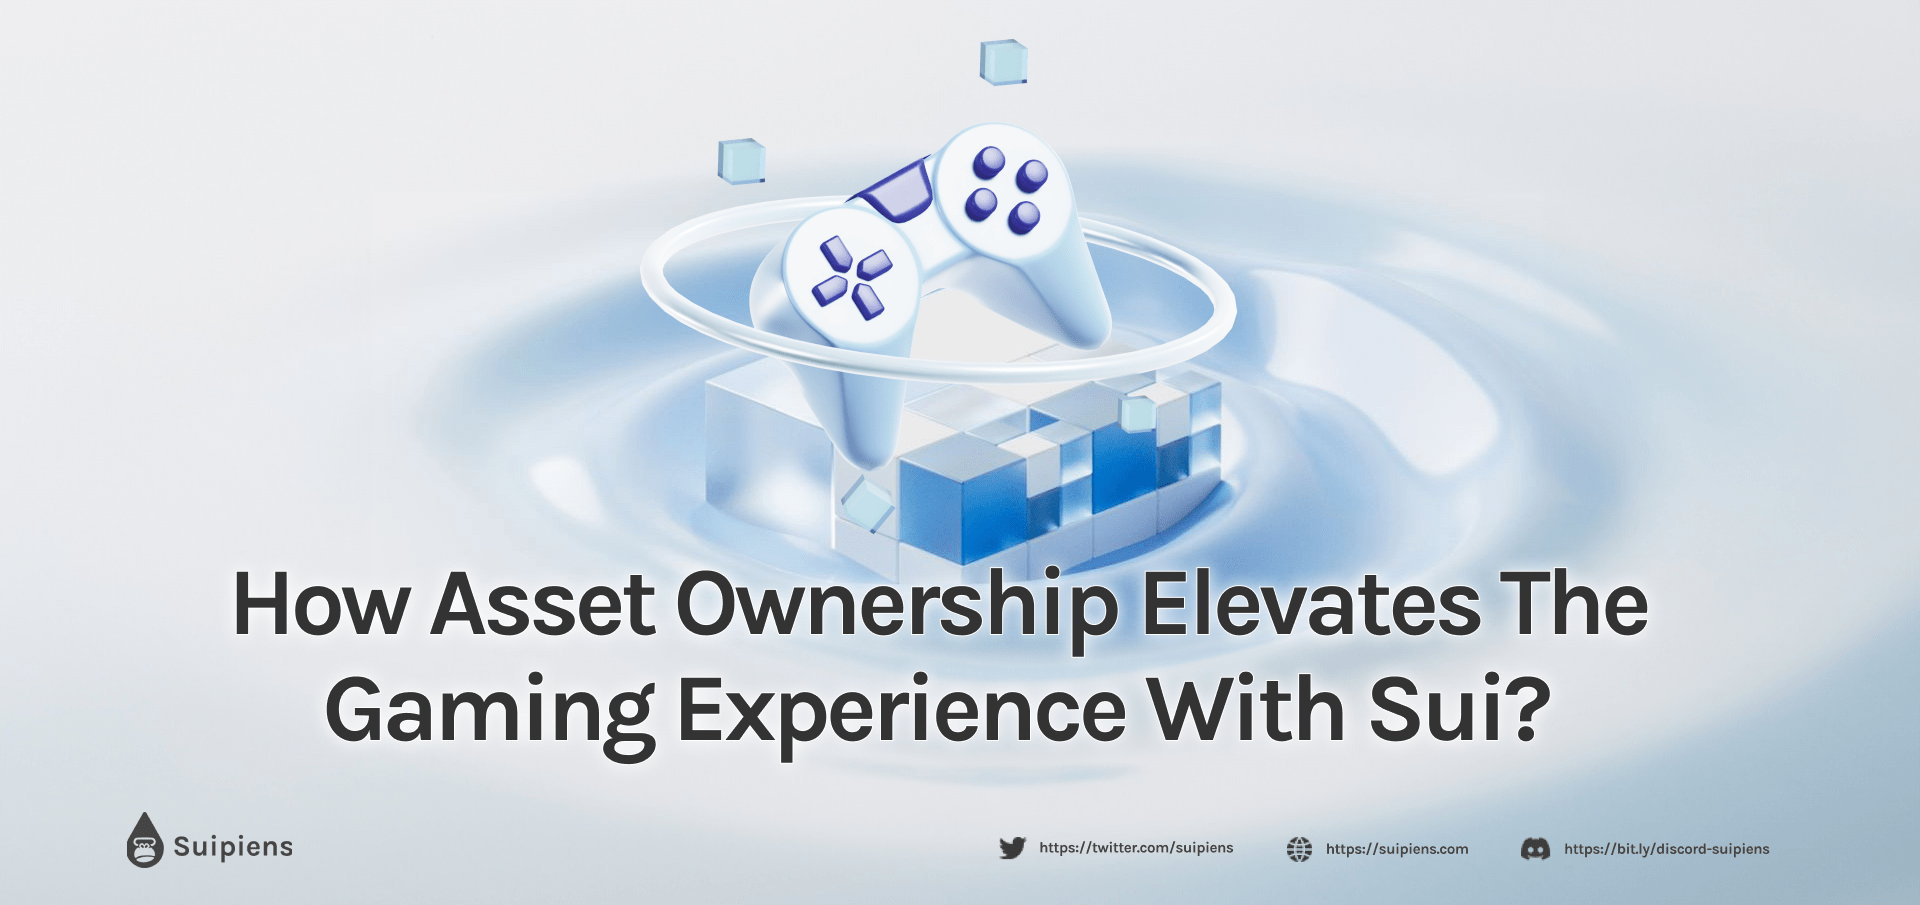 How Asset Ownership Elevates the Gaming Experience with Sui?